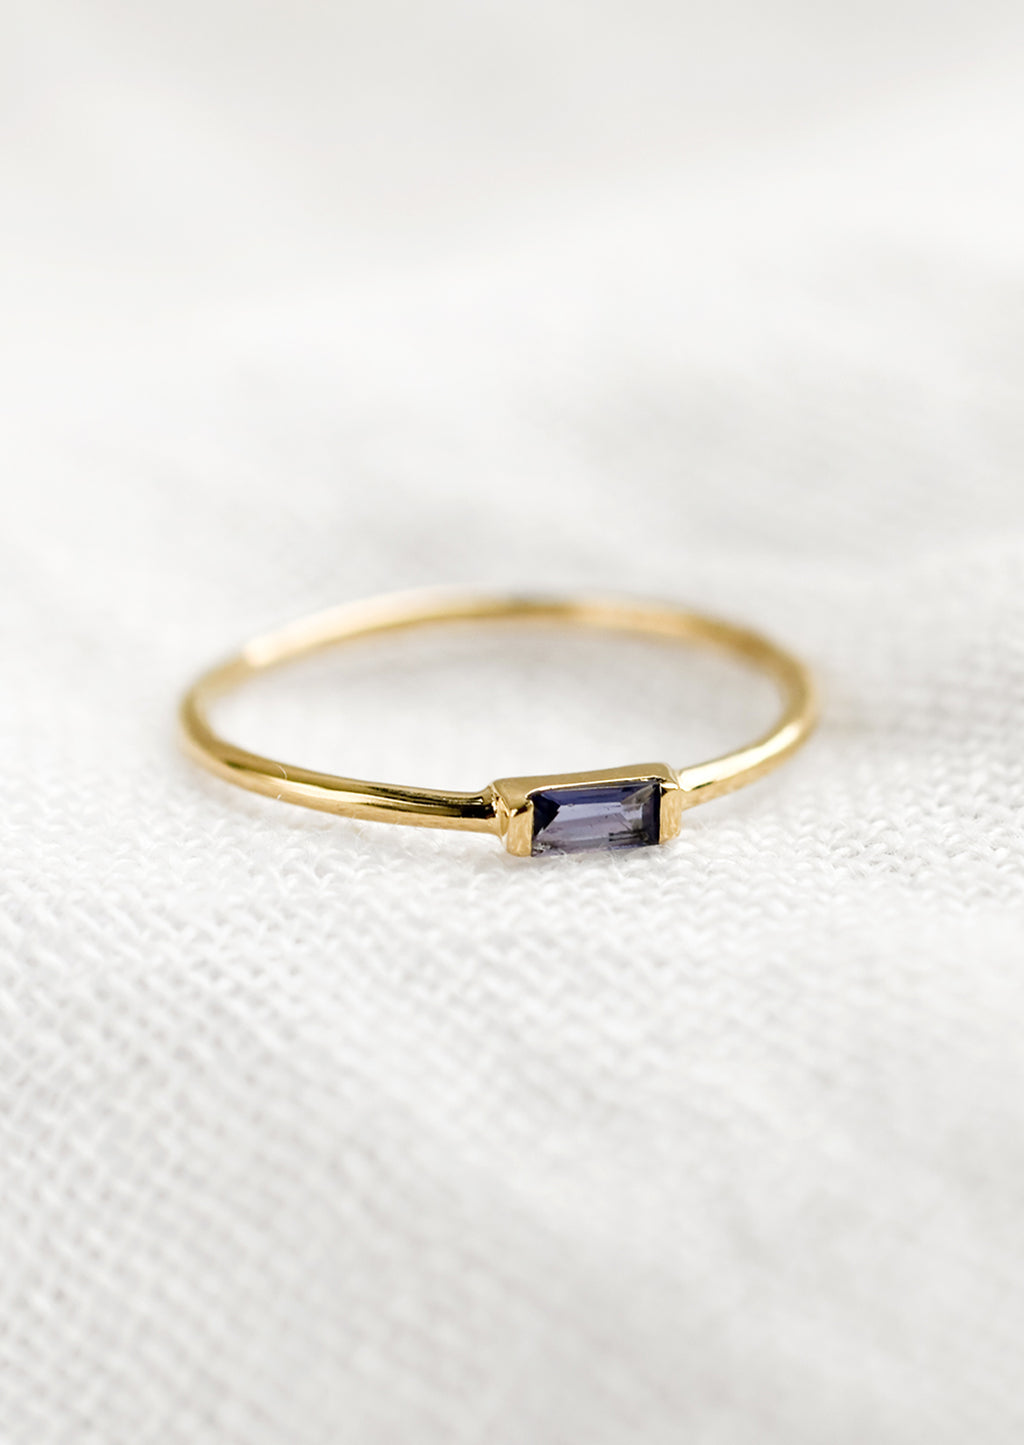 Iolite / Size 5: A gold ring with slim baguette stone in iolite.